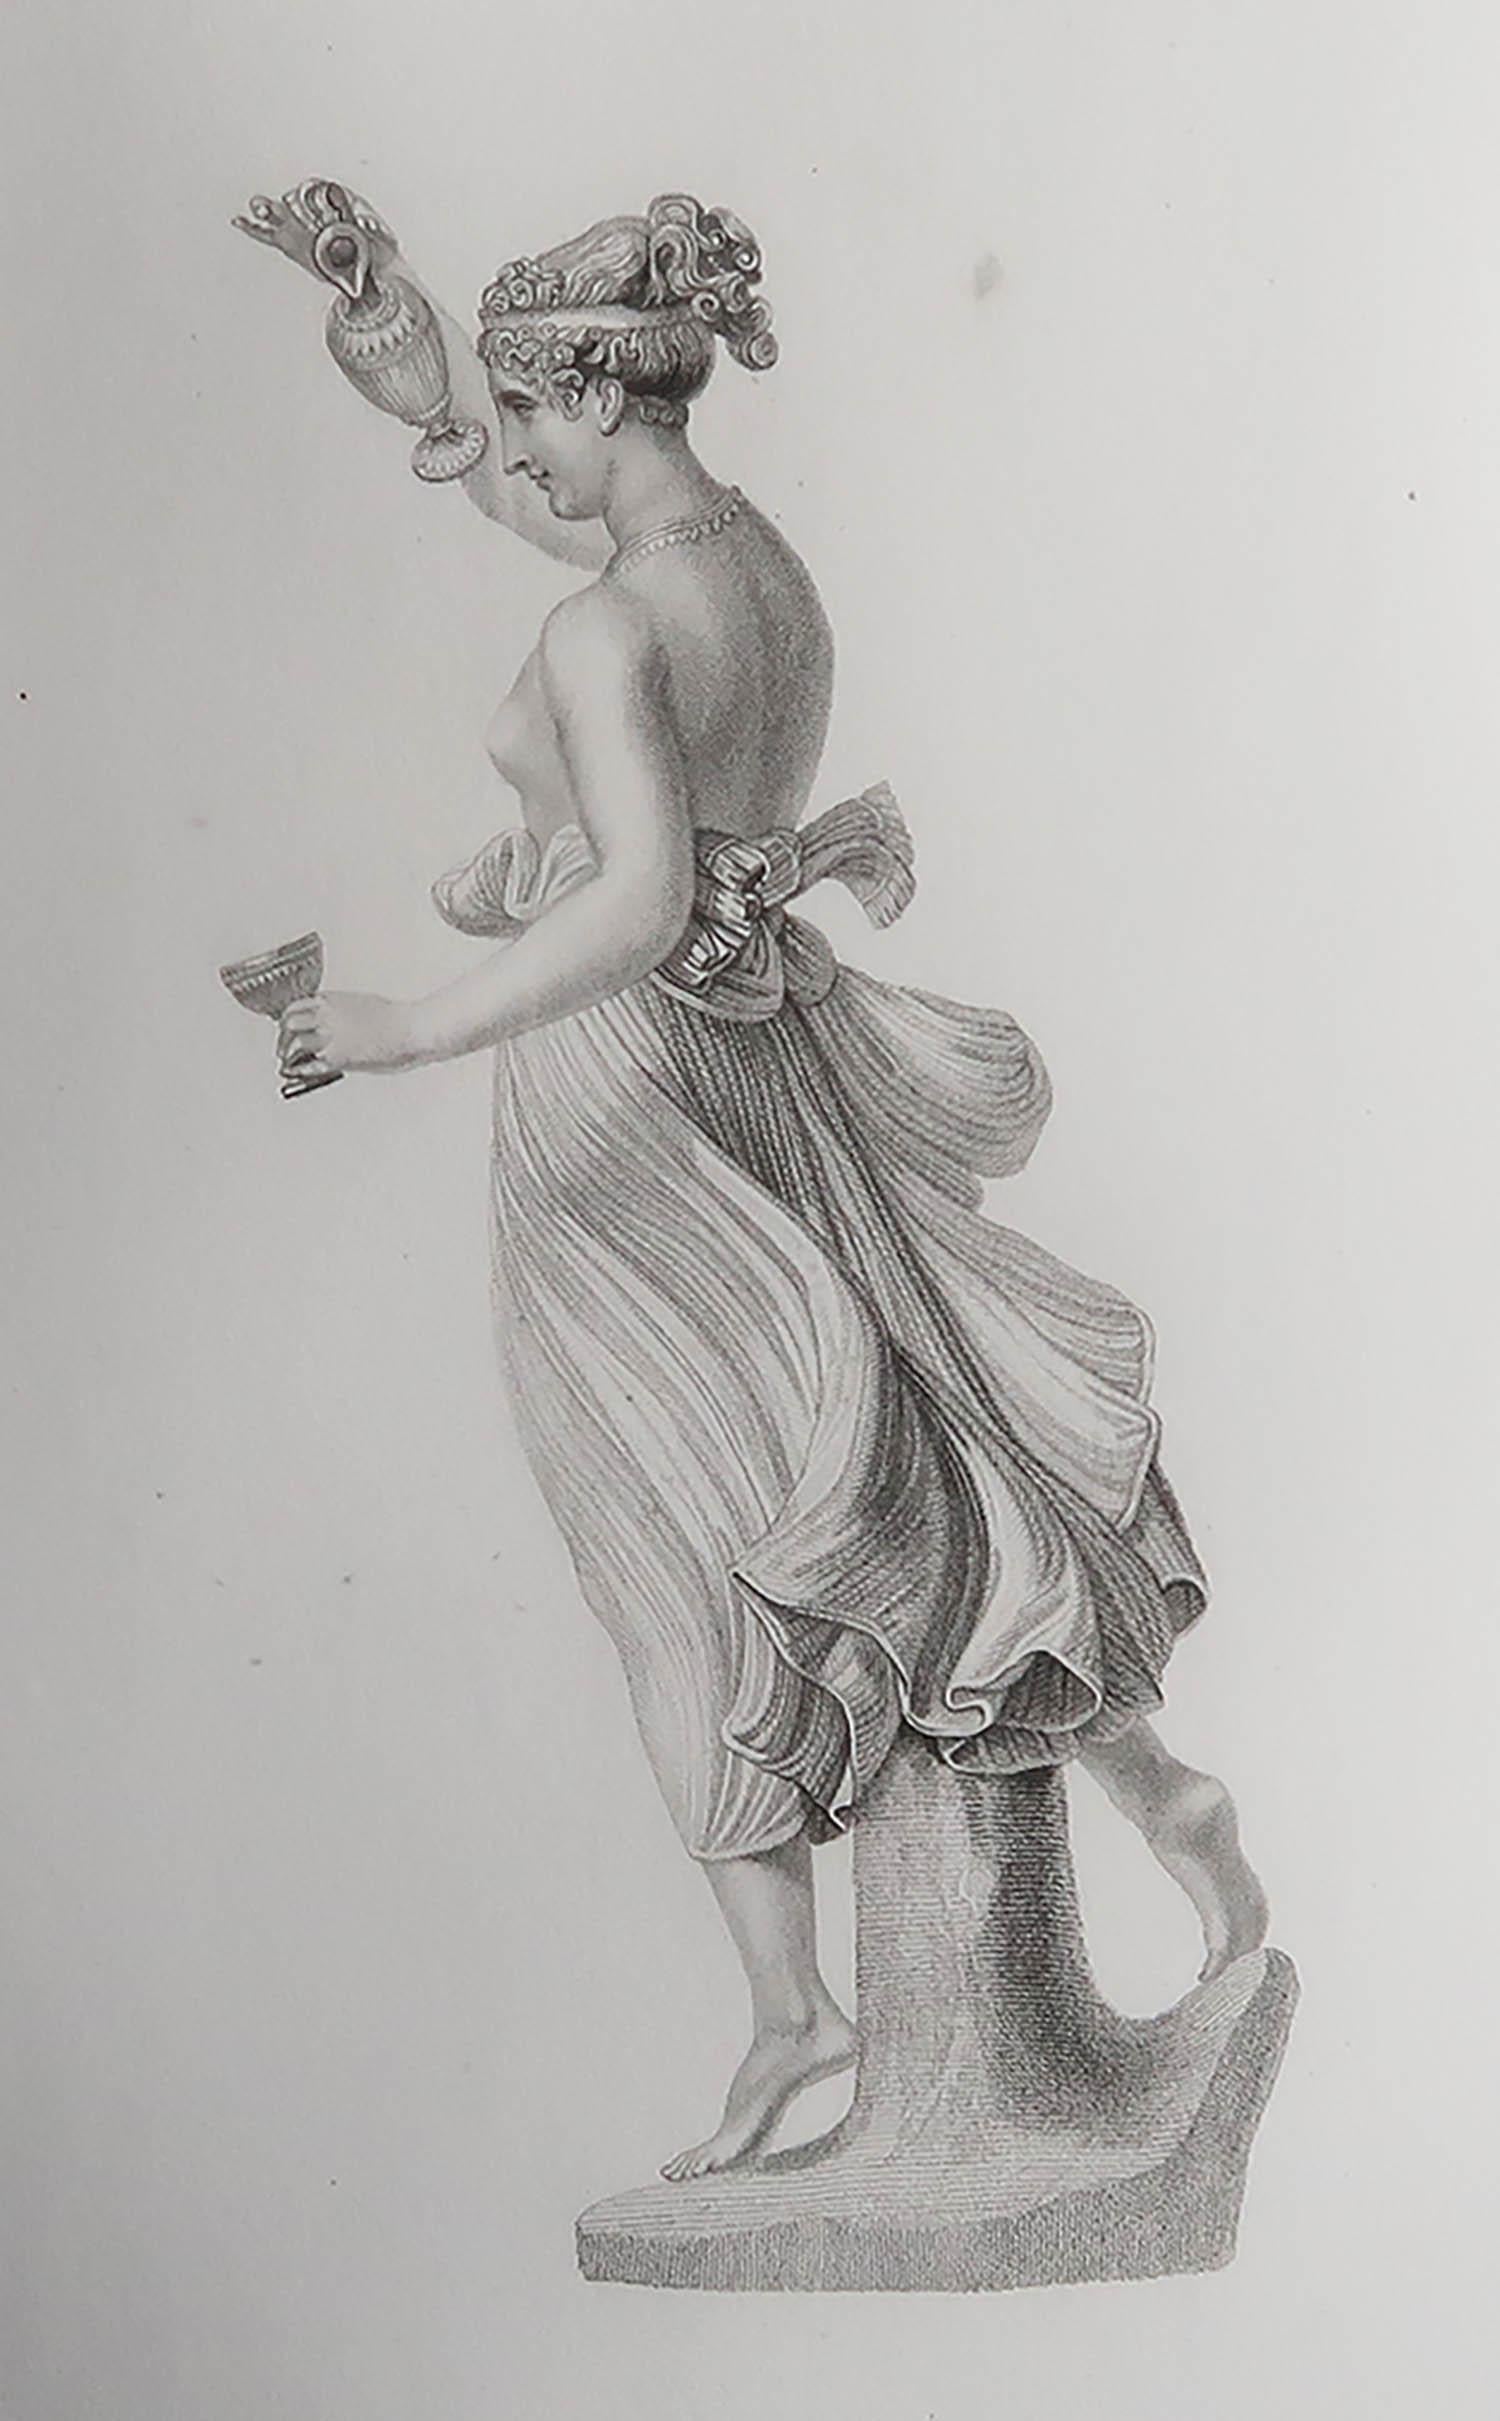 Wonderful image of Hebe

Fine steel engraving. 

Published by Fisher. Dated 1833

Unframed.

